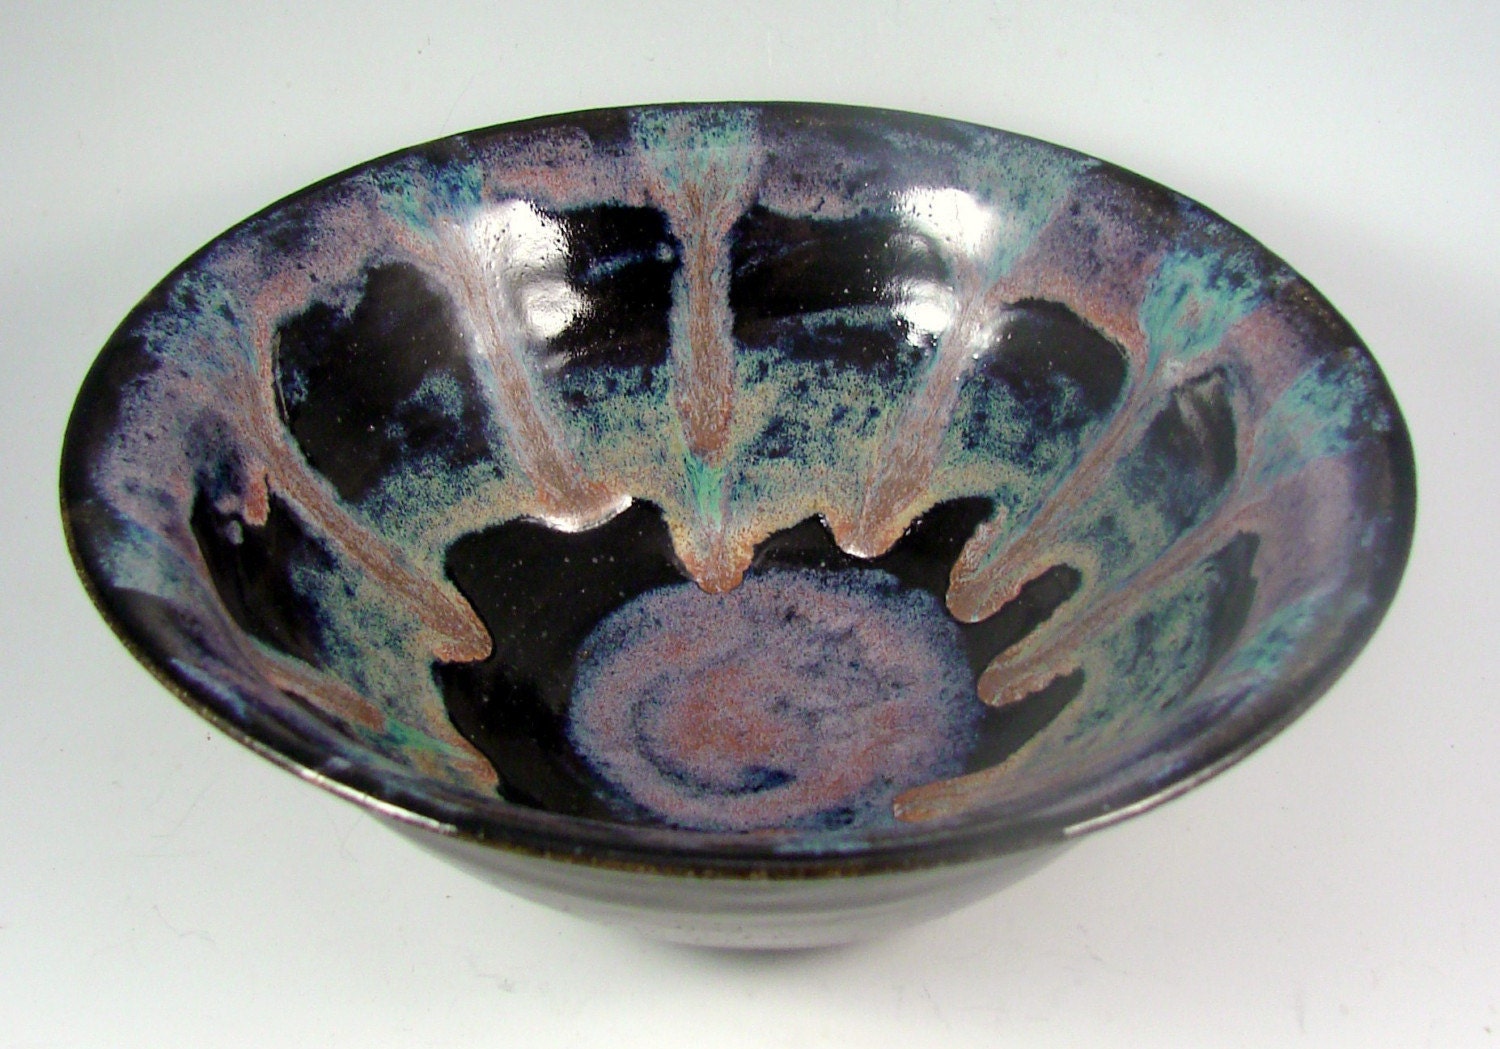 Multi Colored Bowl/Handmade Wheel Thrown Stoneware Clay Pottery